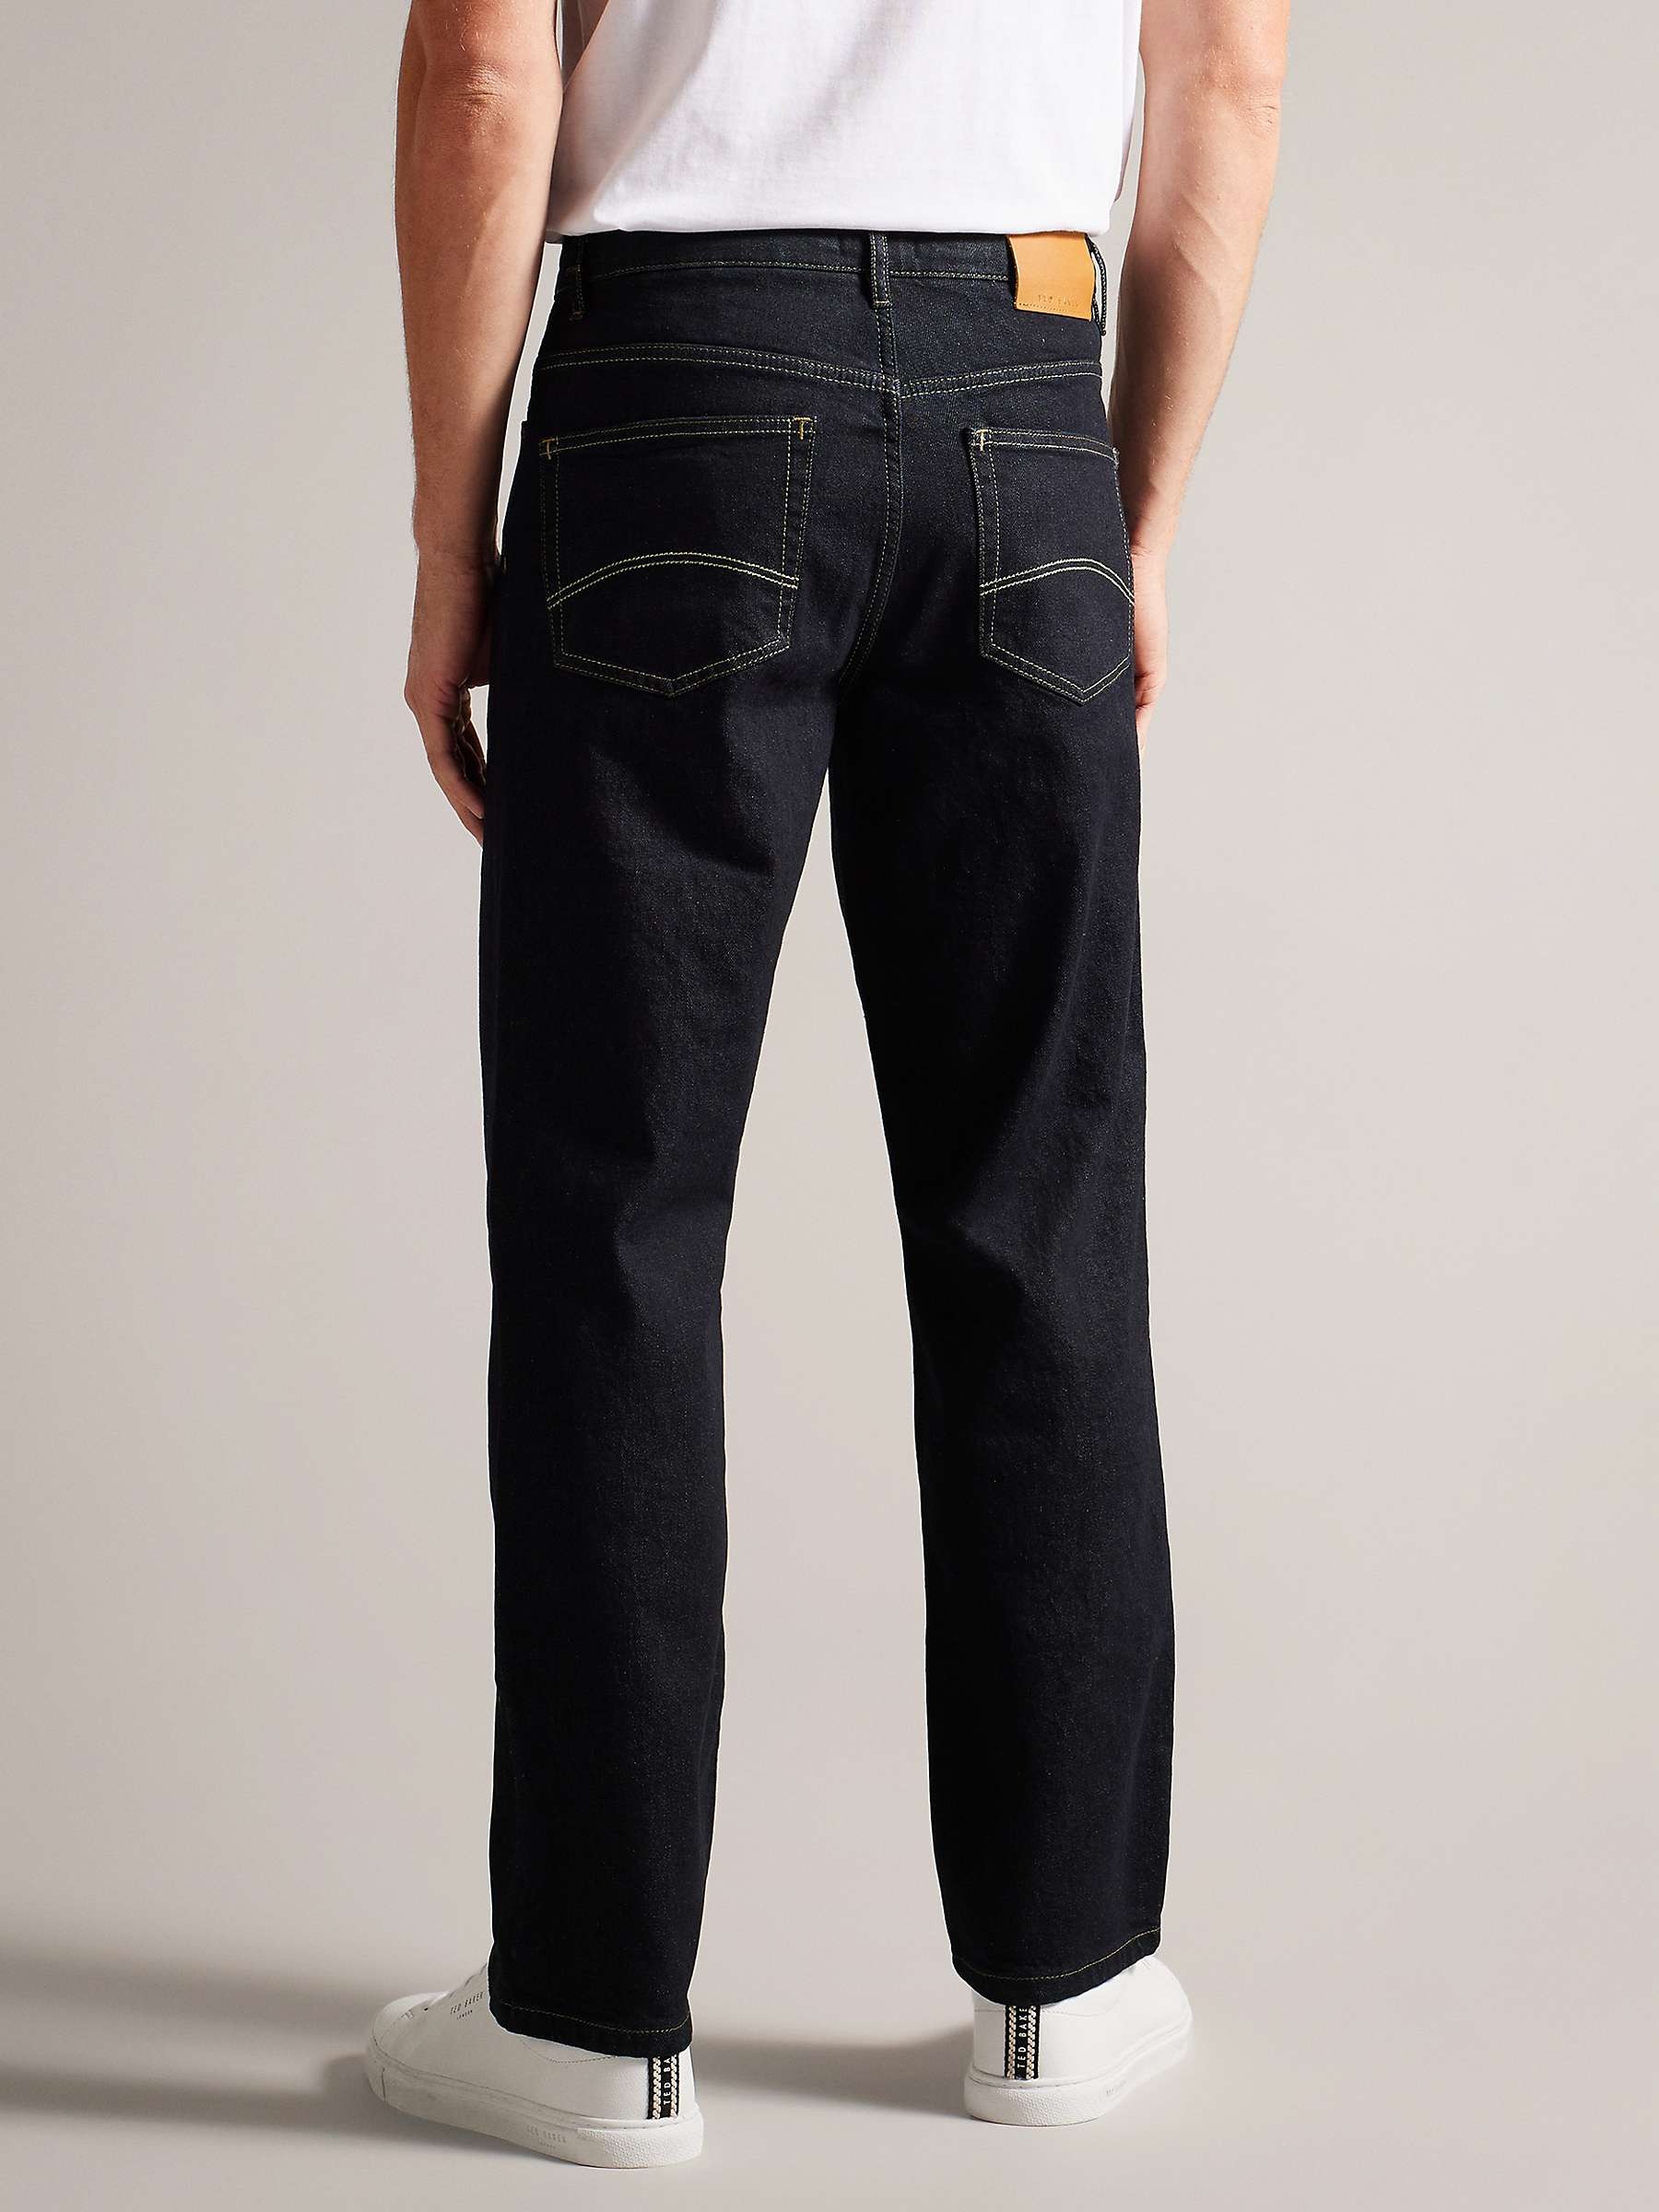 Buy Ted Baker Joeyy Straight Fit Stretch Jeans, Dark Blue Online at johnlewis.com